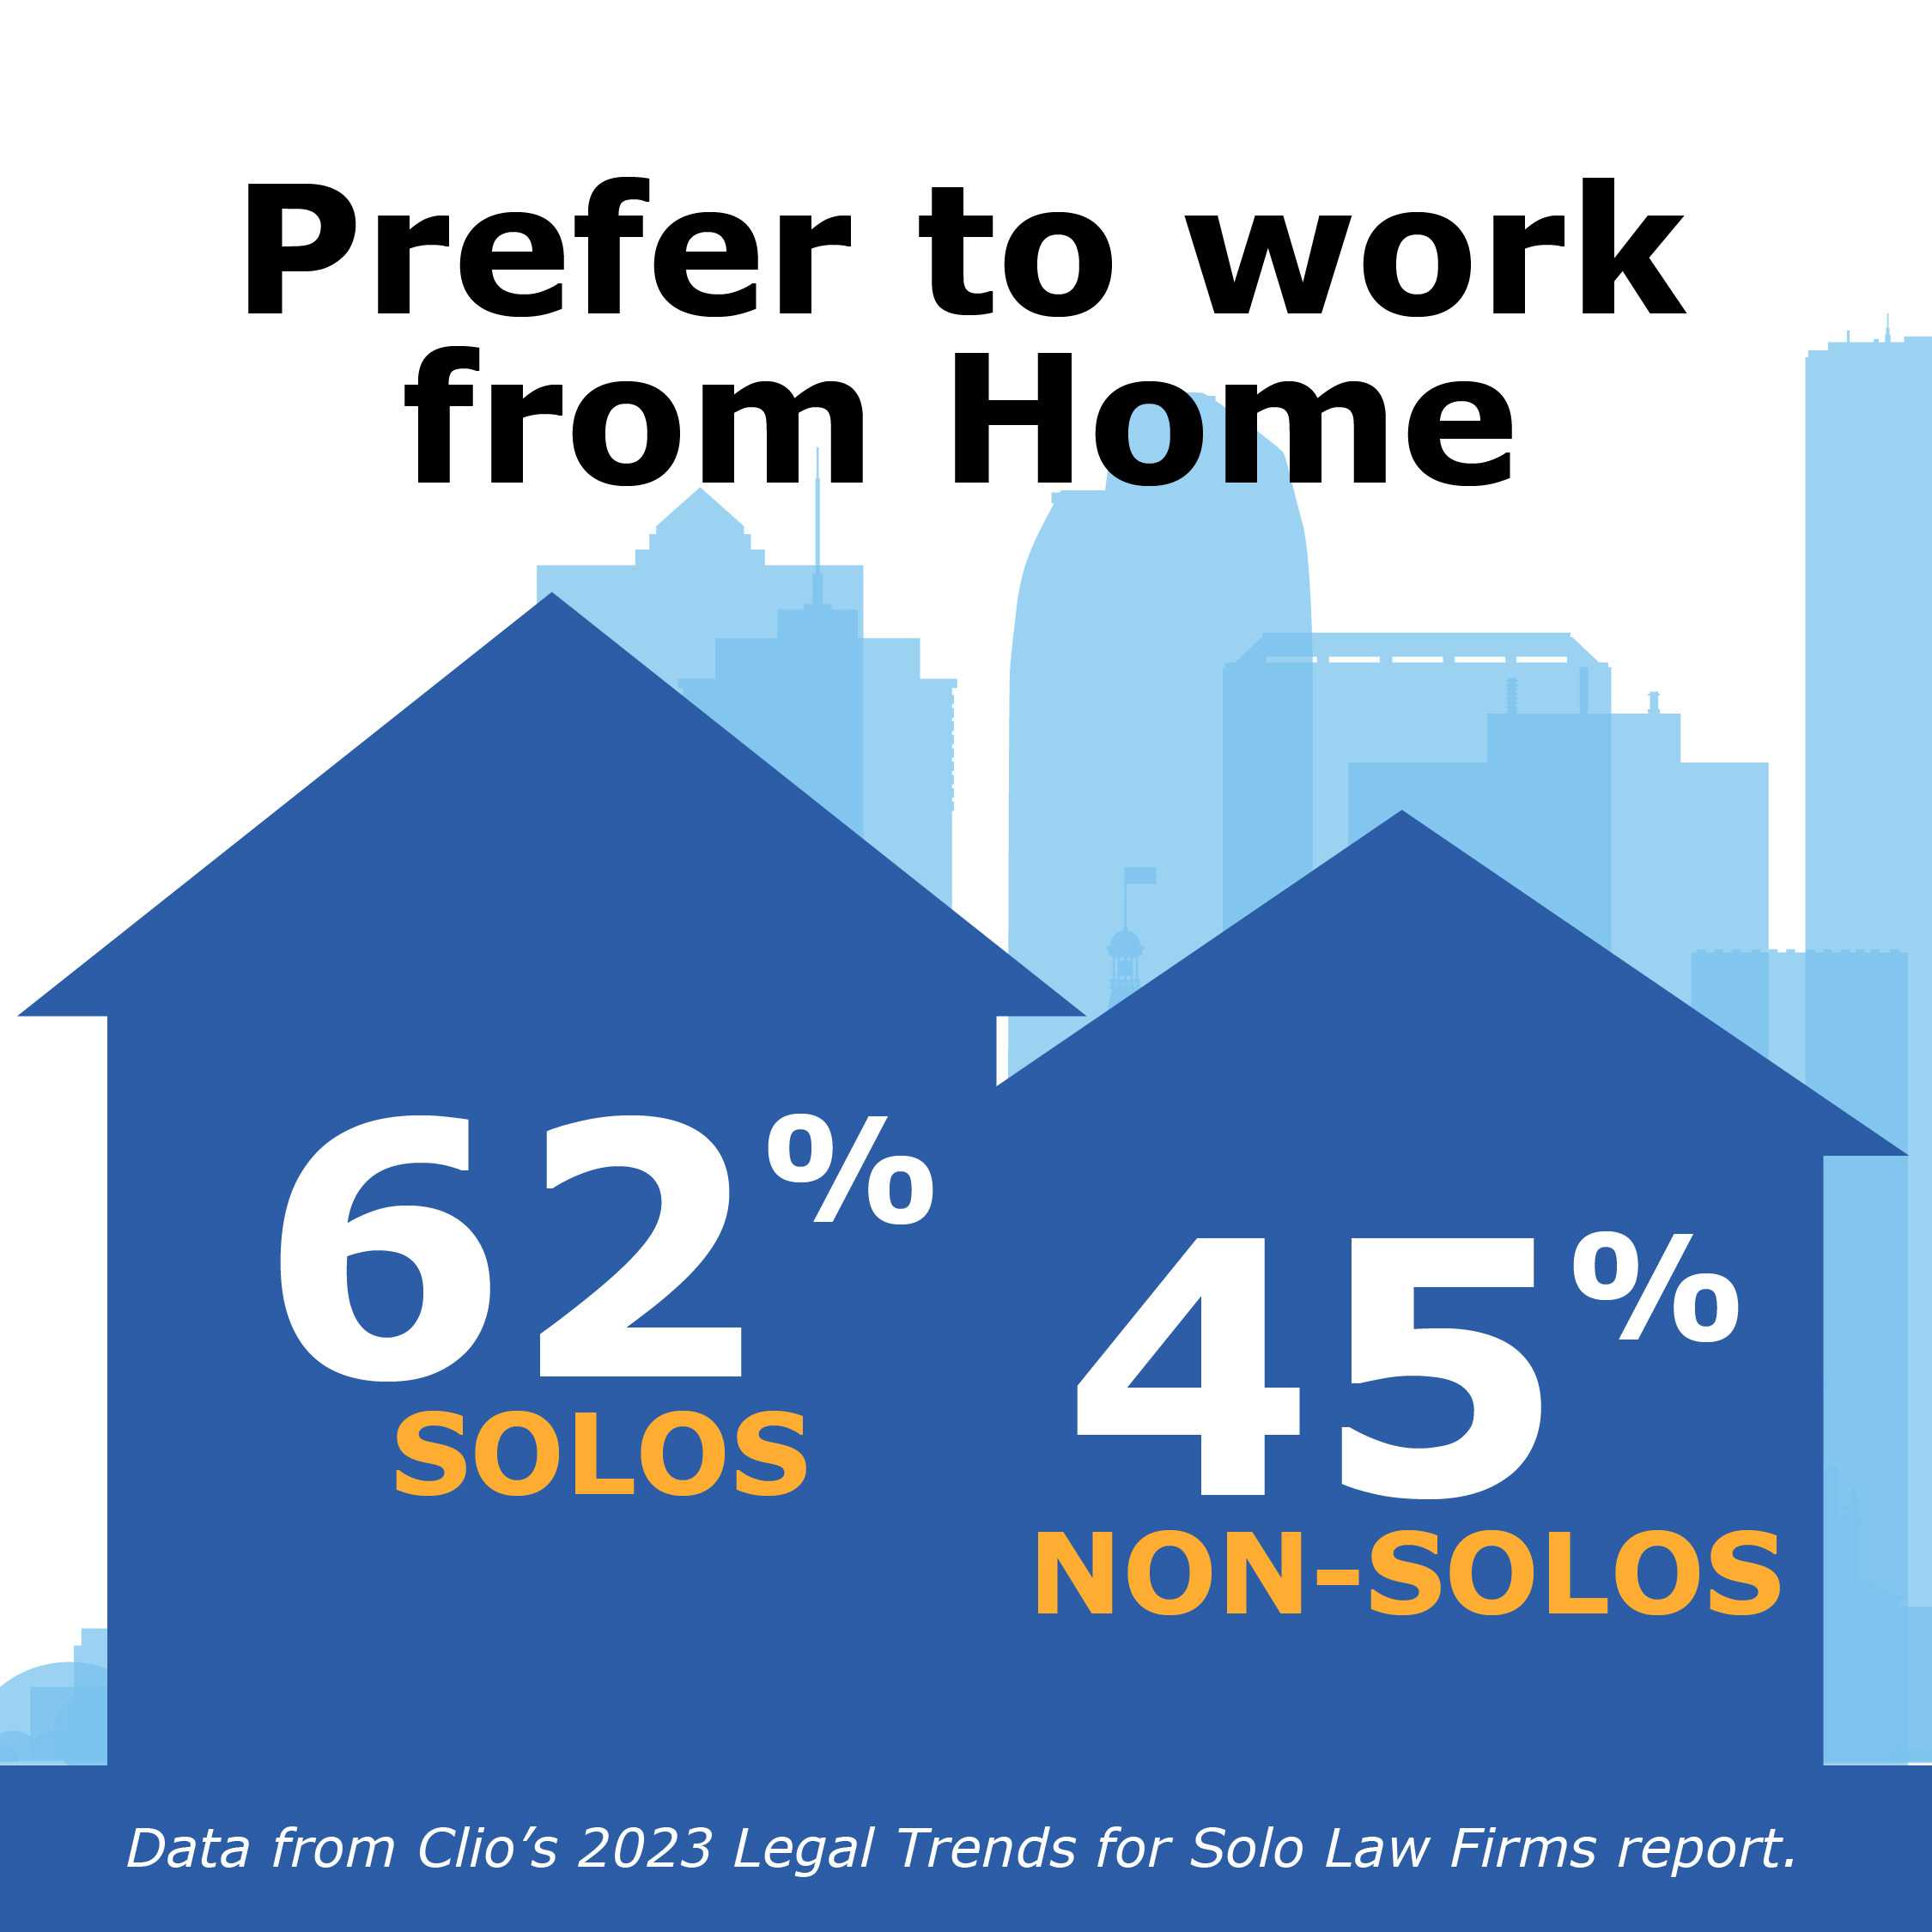 Data from Clio’s 2023 Legal Trends for Solo Law Firms report shows solo attorneys may prefer to work from home more than non-solo attorneys. Clio found that 62% of solos and 45% of non-solos prefer to work from home. 